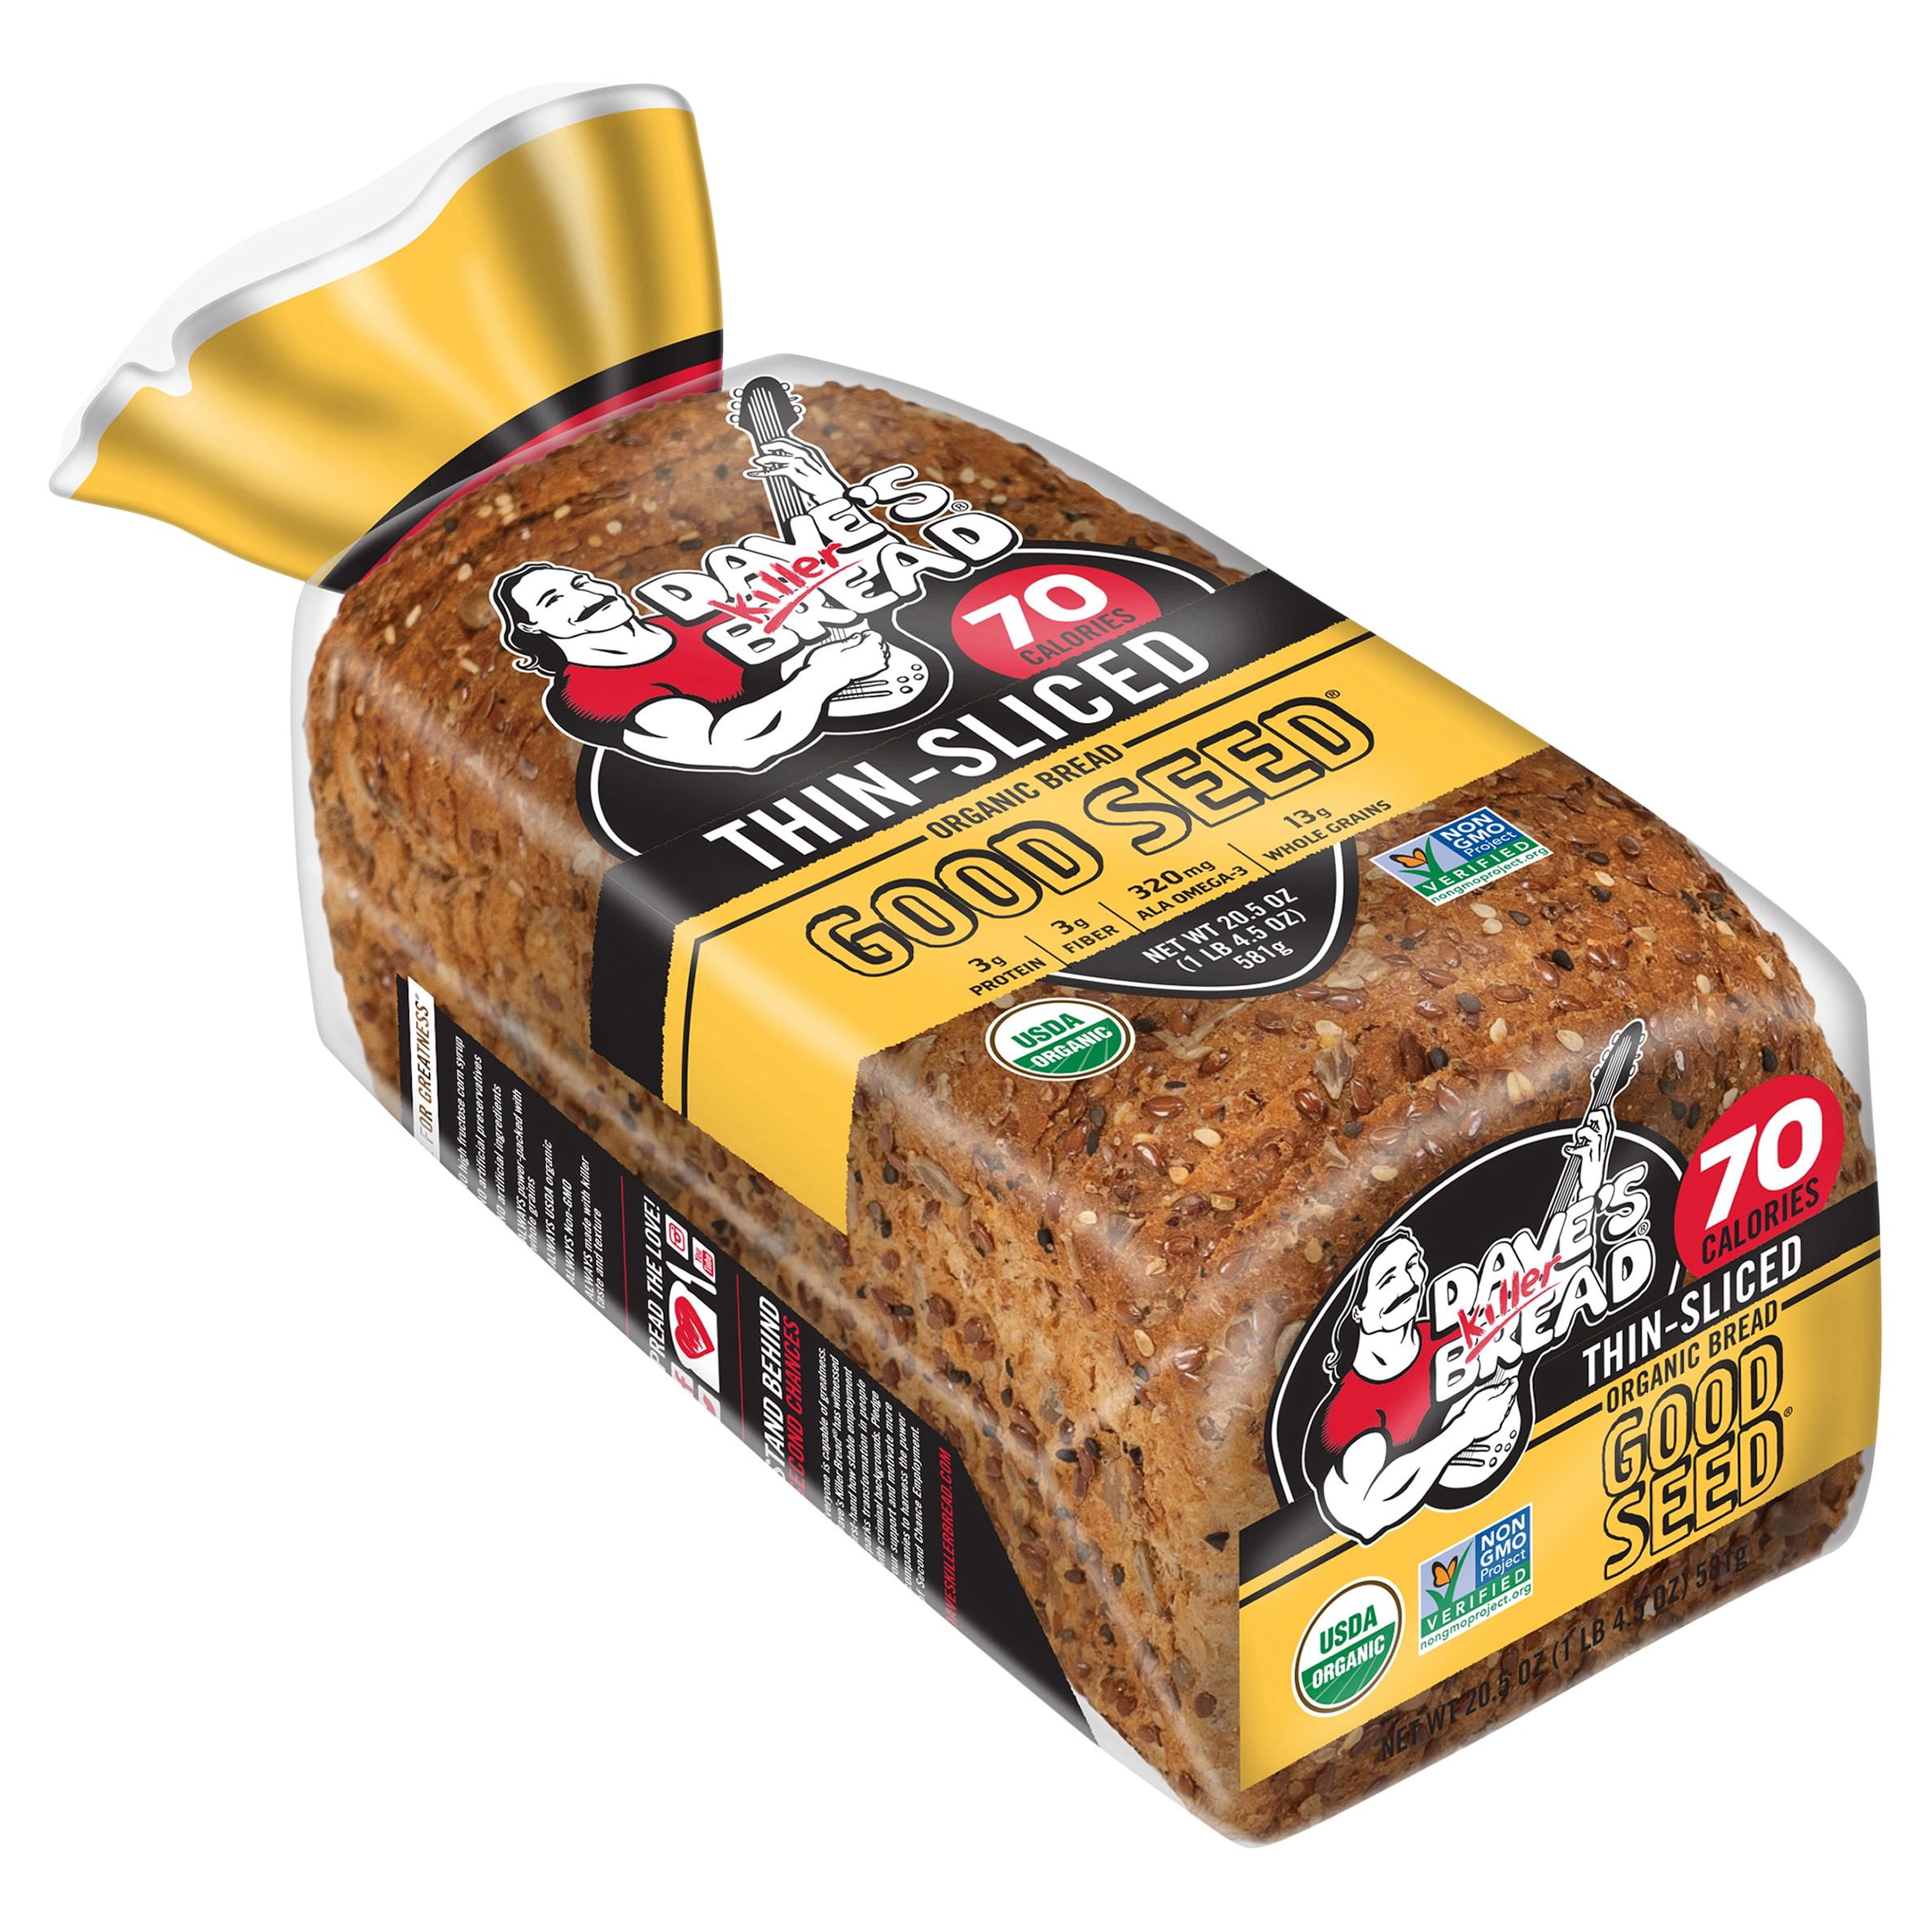 Dave's Killer Bread Good Seed Thin-Sliced Organic Bread Loaf, 20.5 oz - image 10 of 17